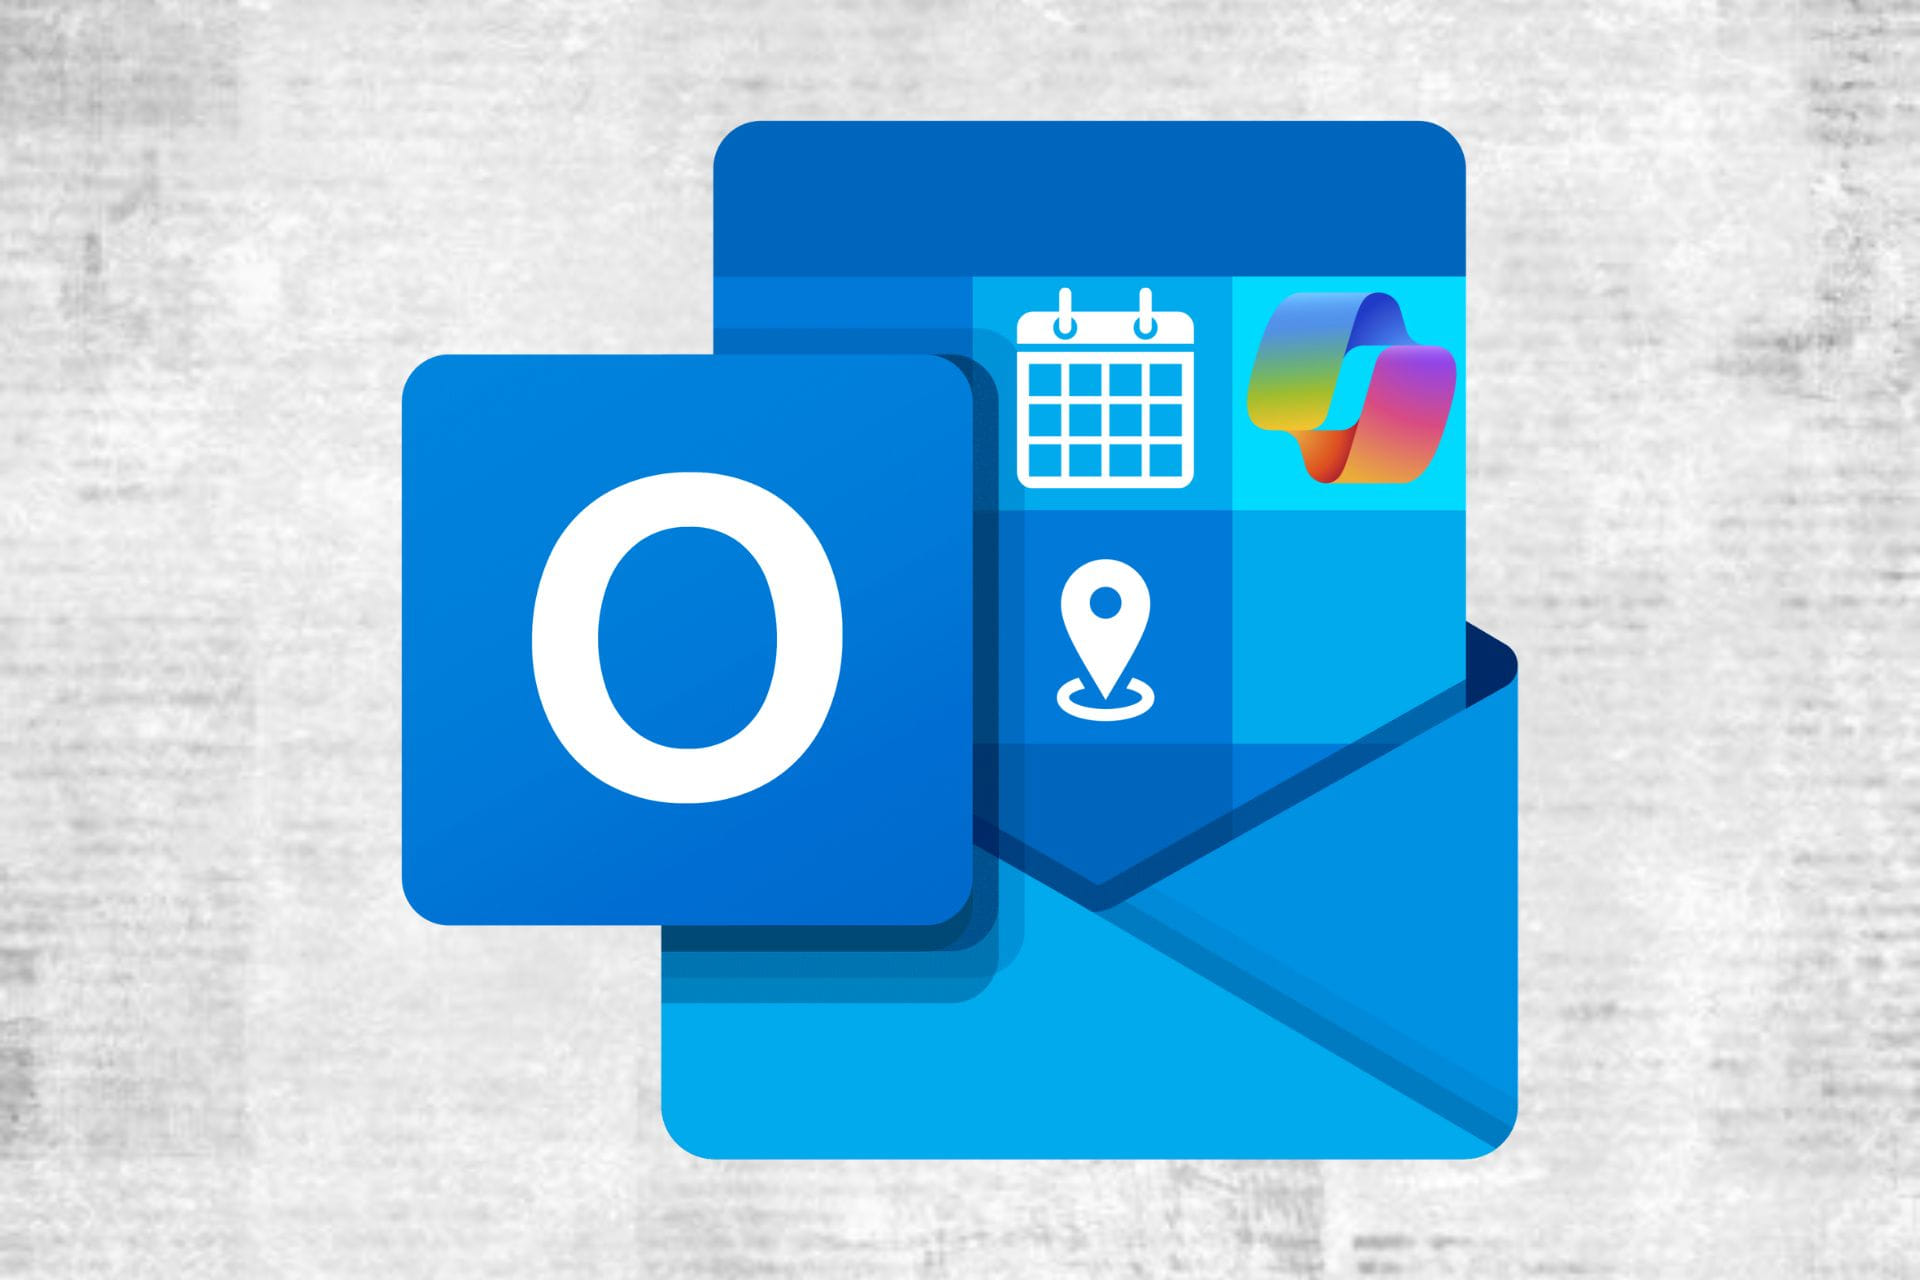 Outlook featuring Work Hours and Location symbols